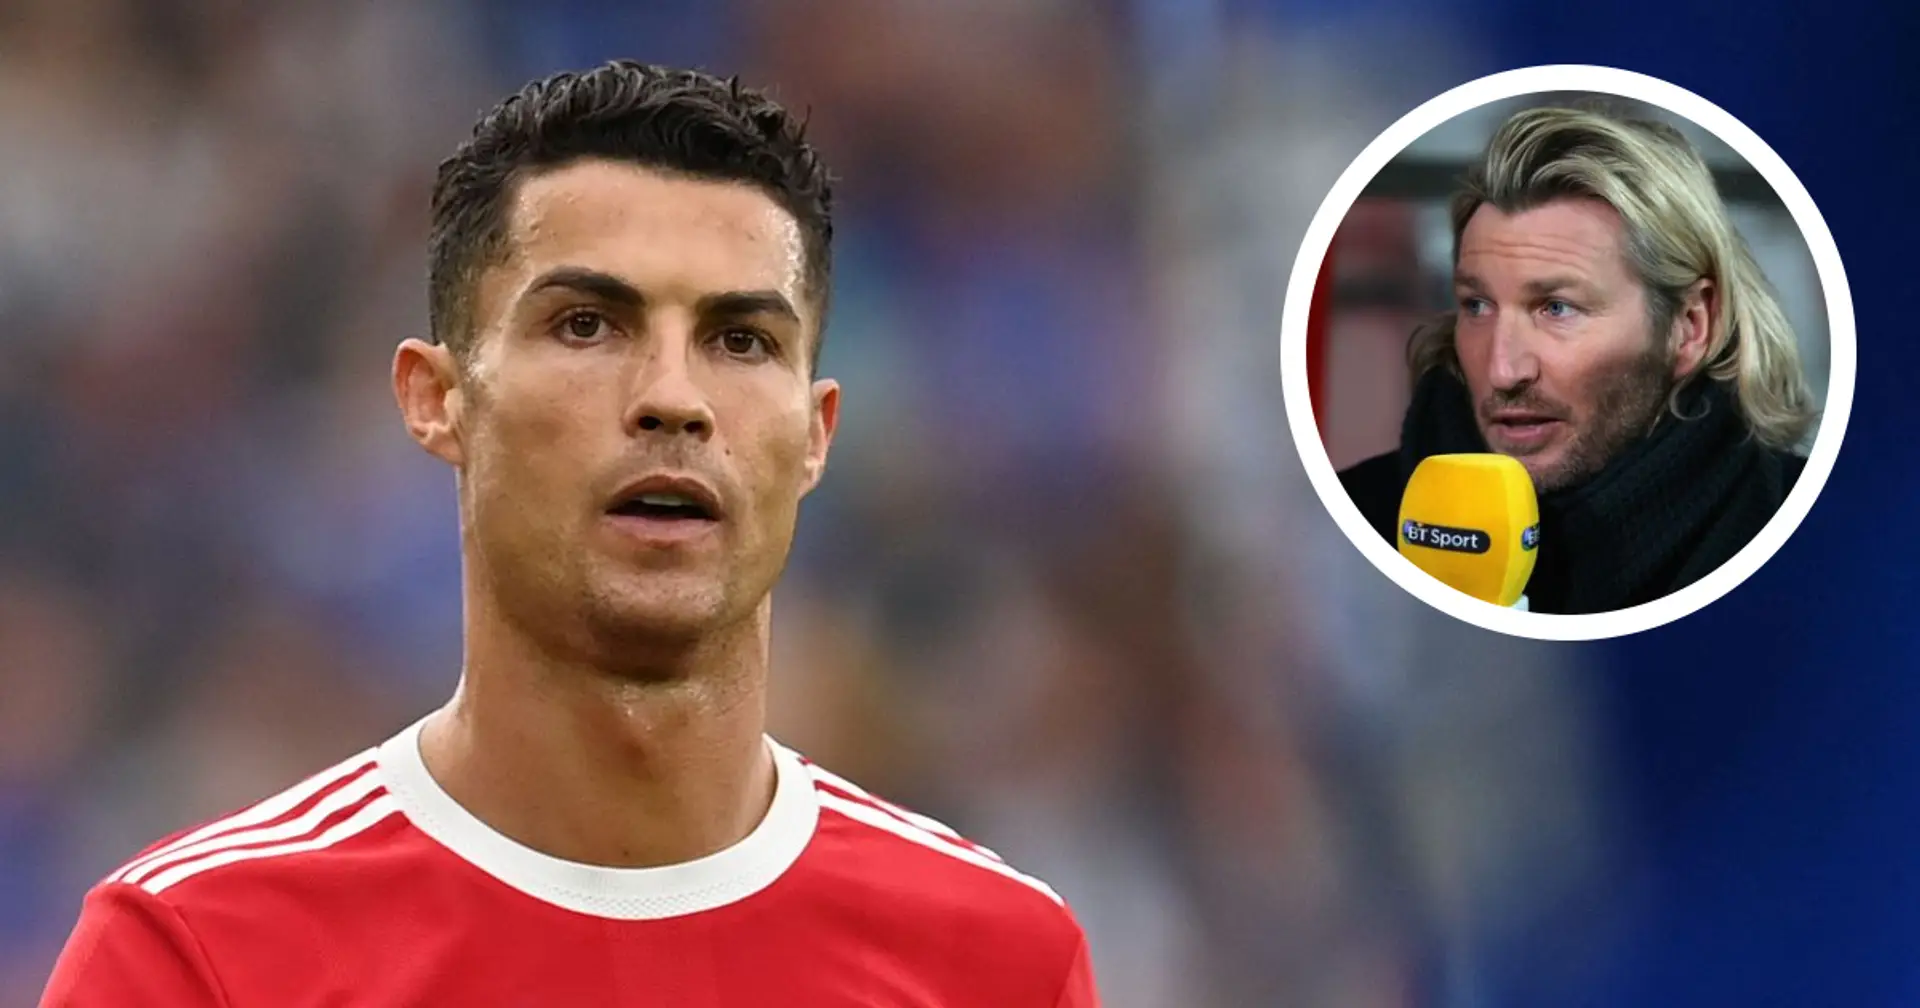 'There's no question he's a leader of men': Robbie Savage makes case for Ronaldo to become captain